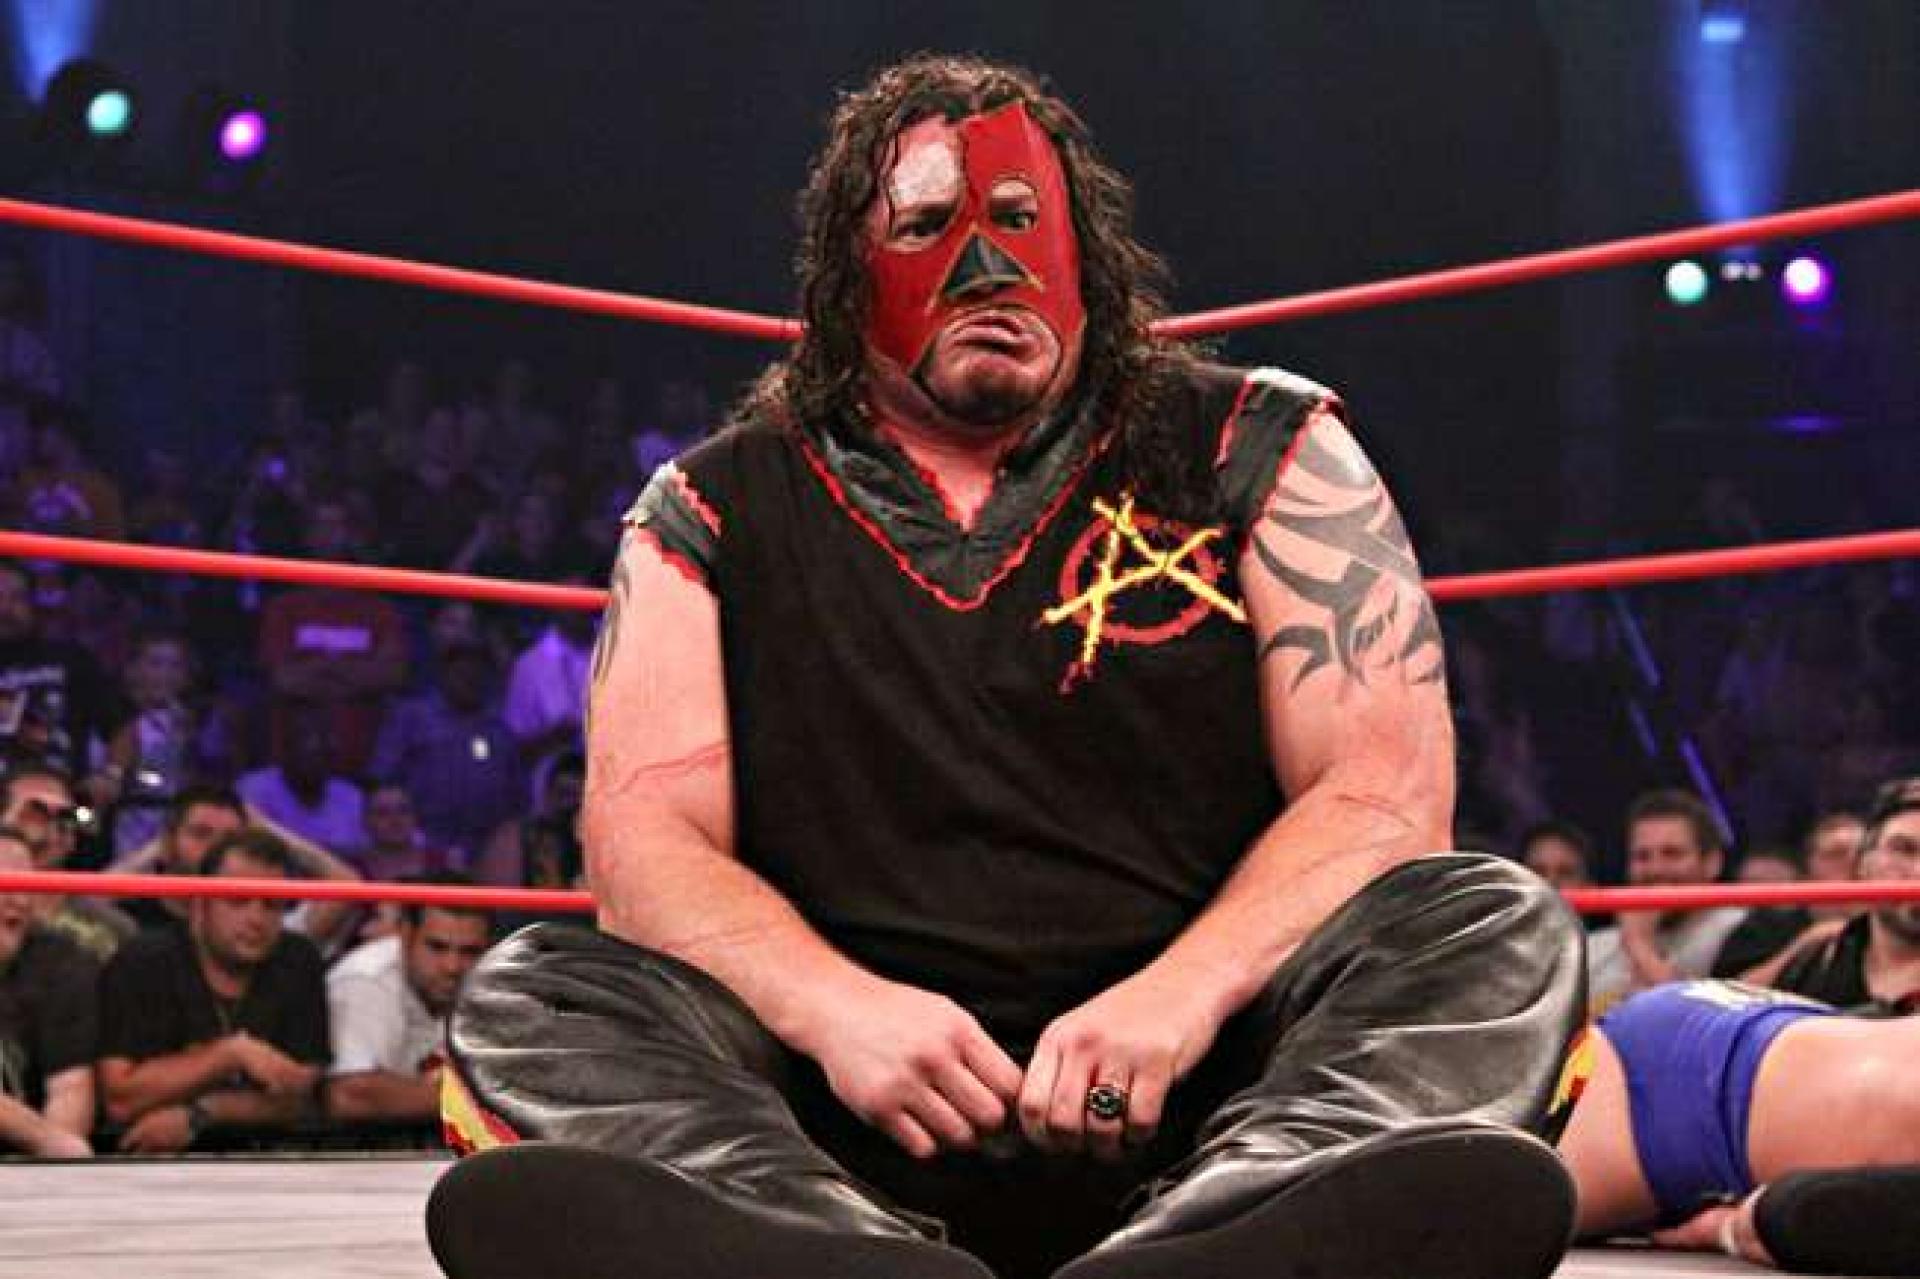 Abyss during his TNA days